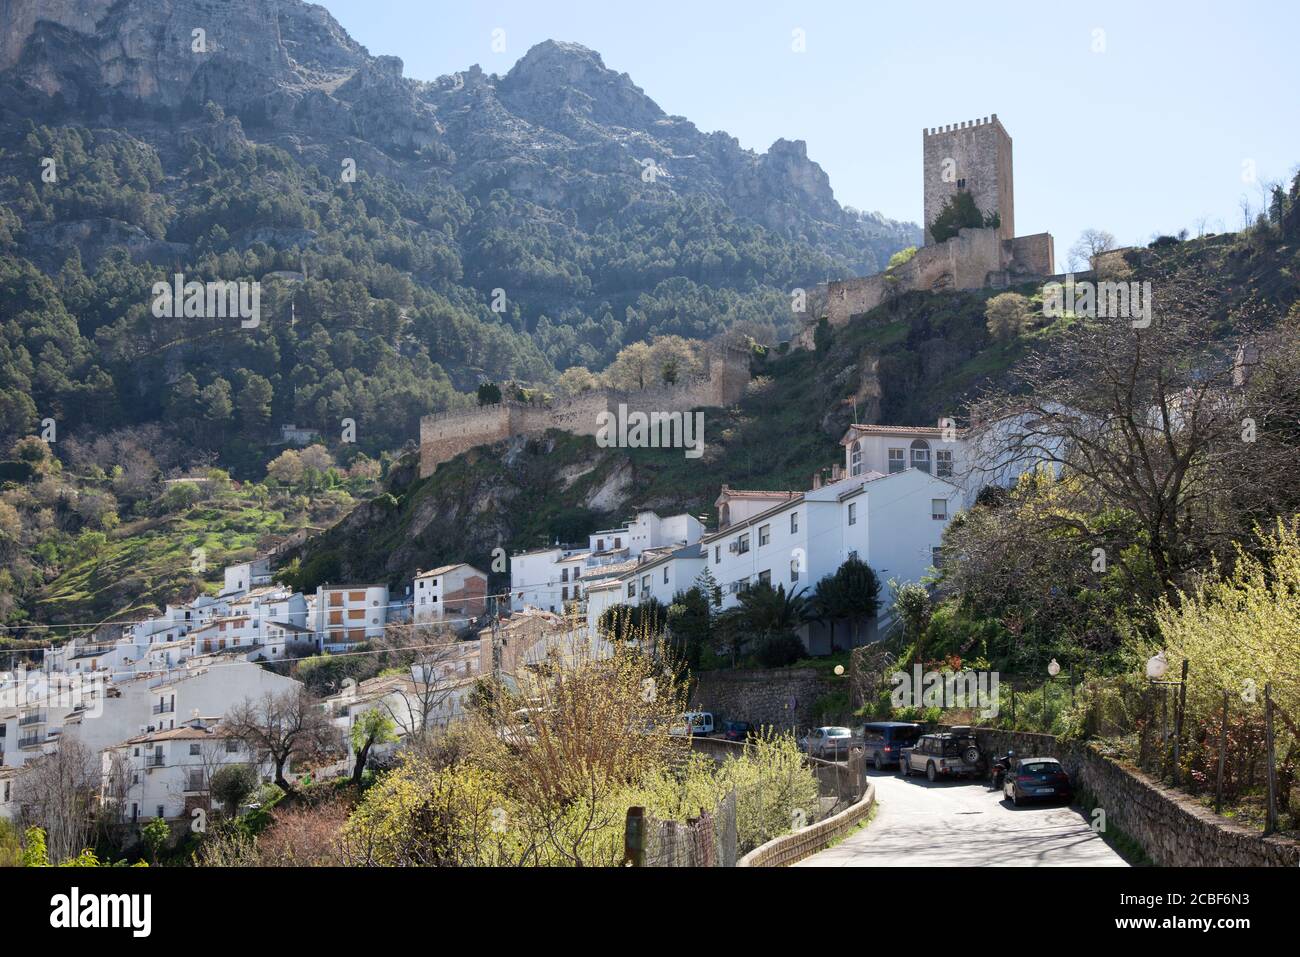 The Castillo de la Yedra overlooks the town of Cazorla in Spain with its whitewashed houses and mountainous backdrop. Stock Photo